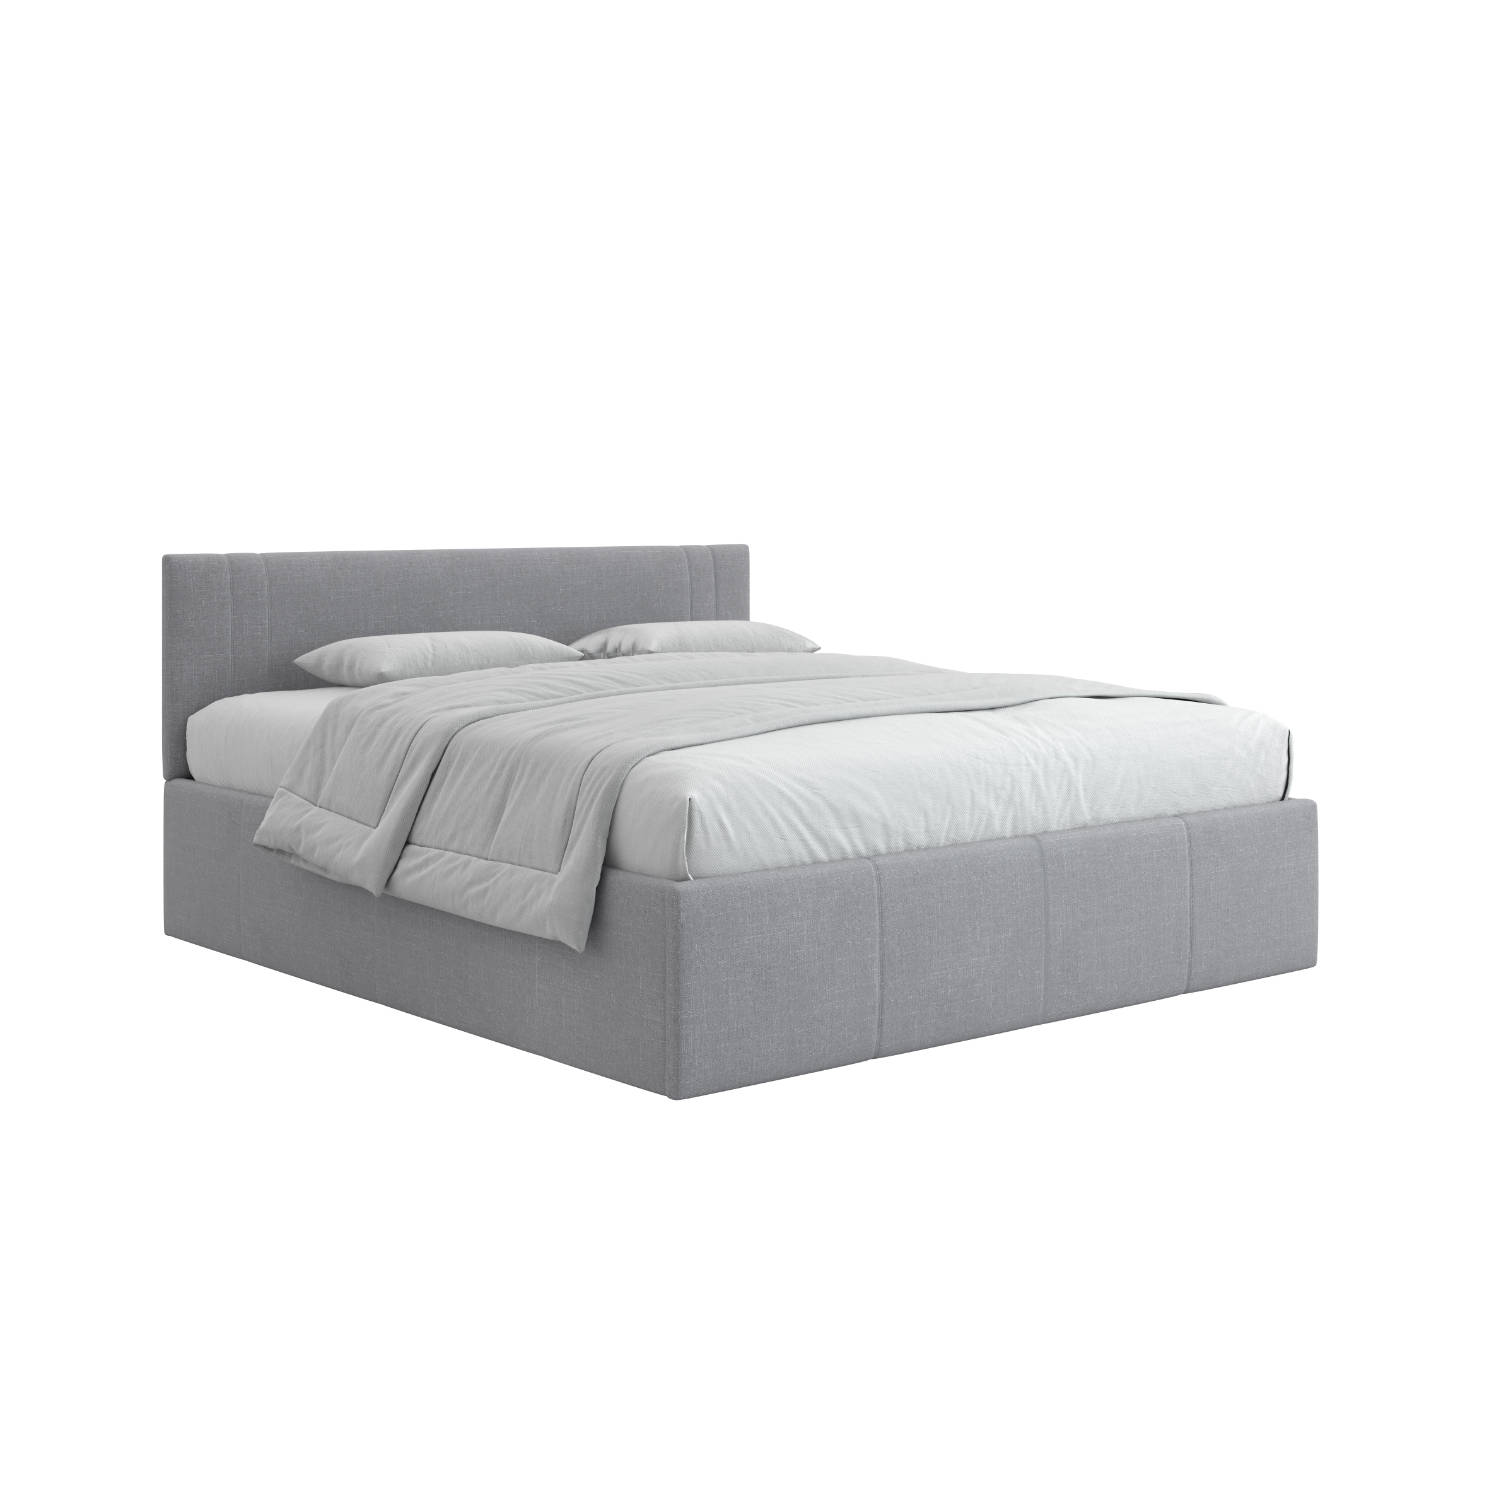 https://expandfurniture.com/wp-content/uploads/2017/07/Reveal-King-grey-deep-under-storage-bed-with-lifting-system.jpg